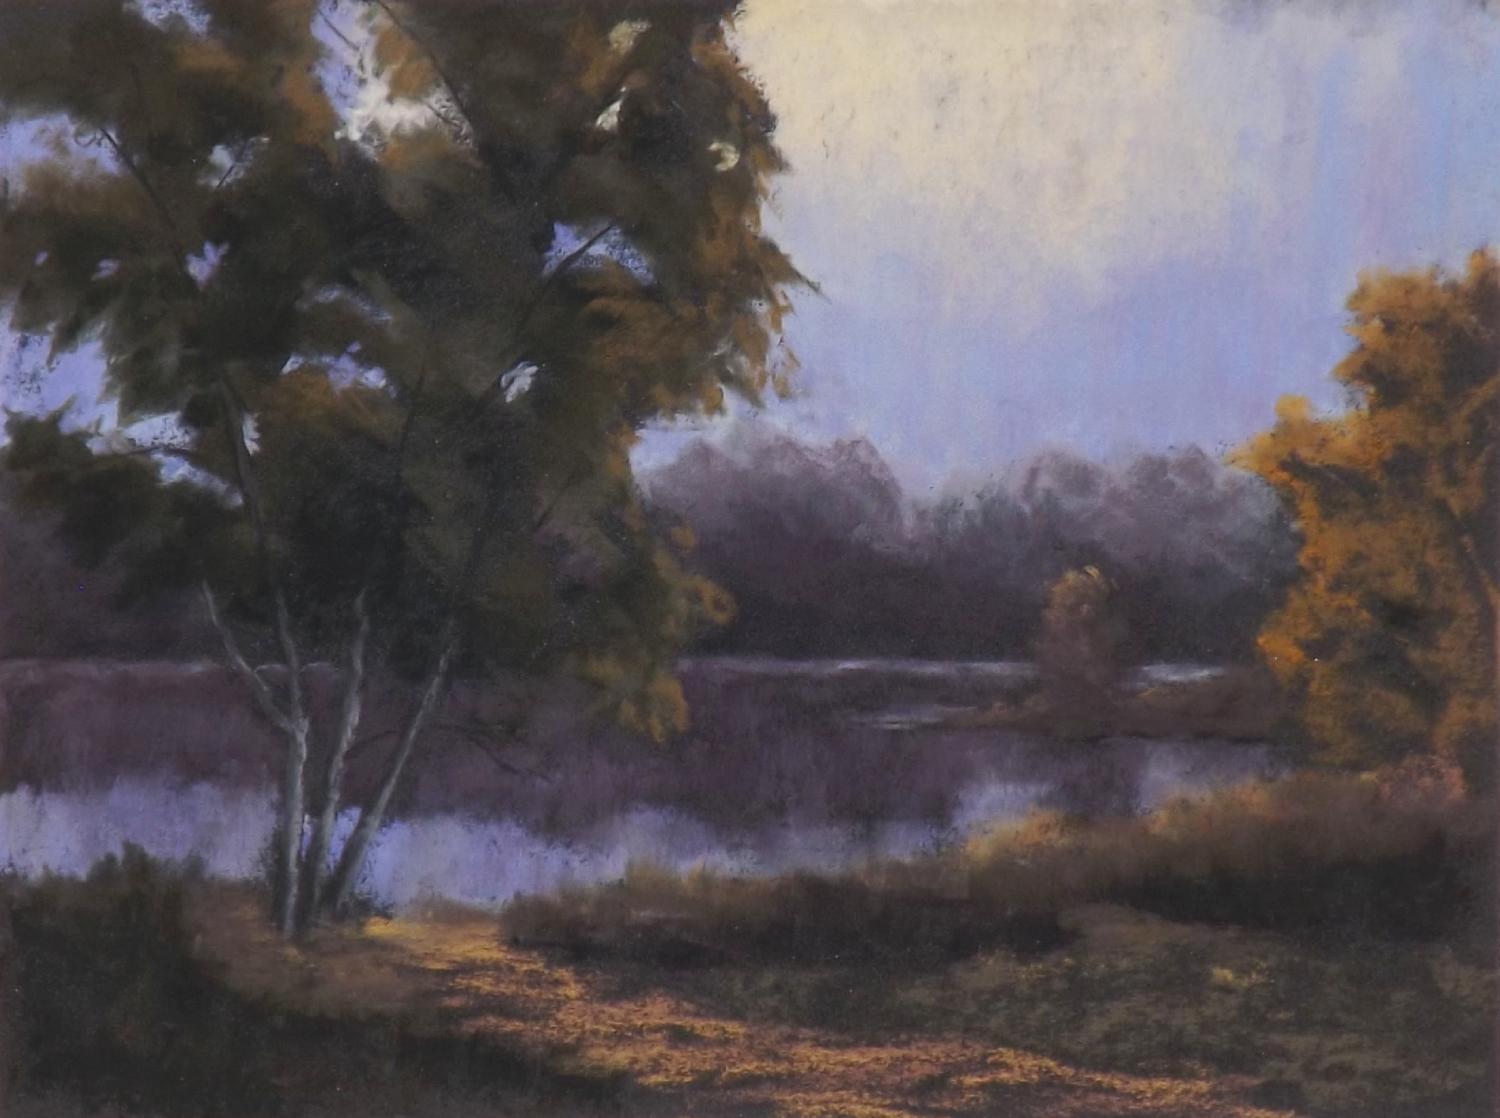 The Pond in Evening Light, Original Painting